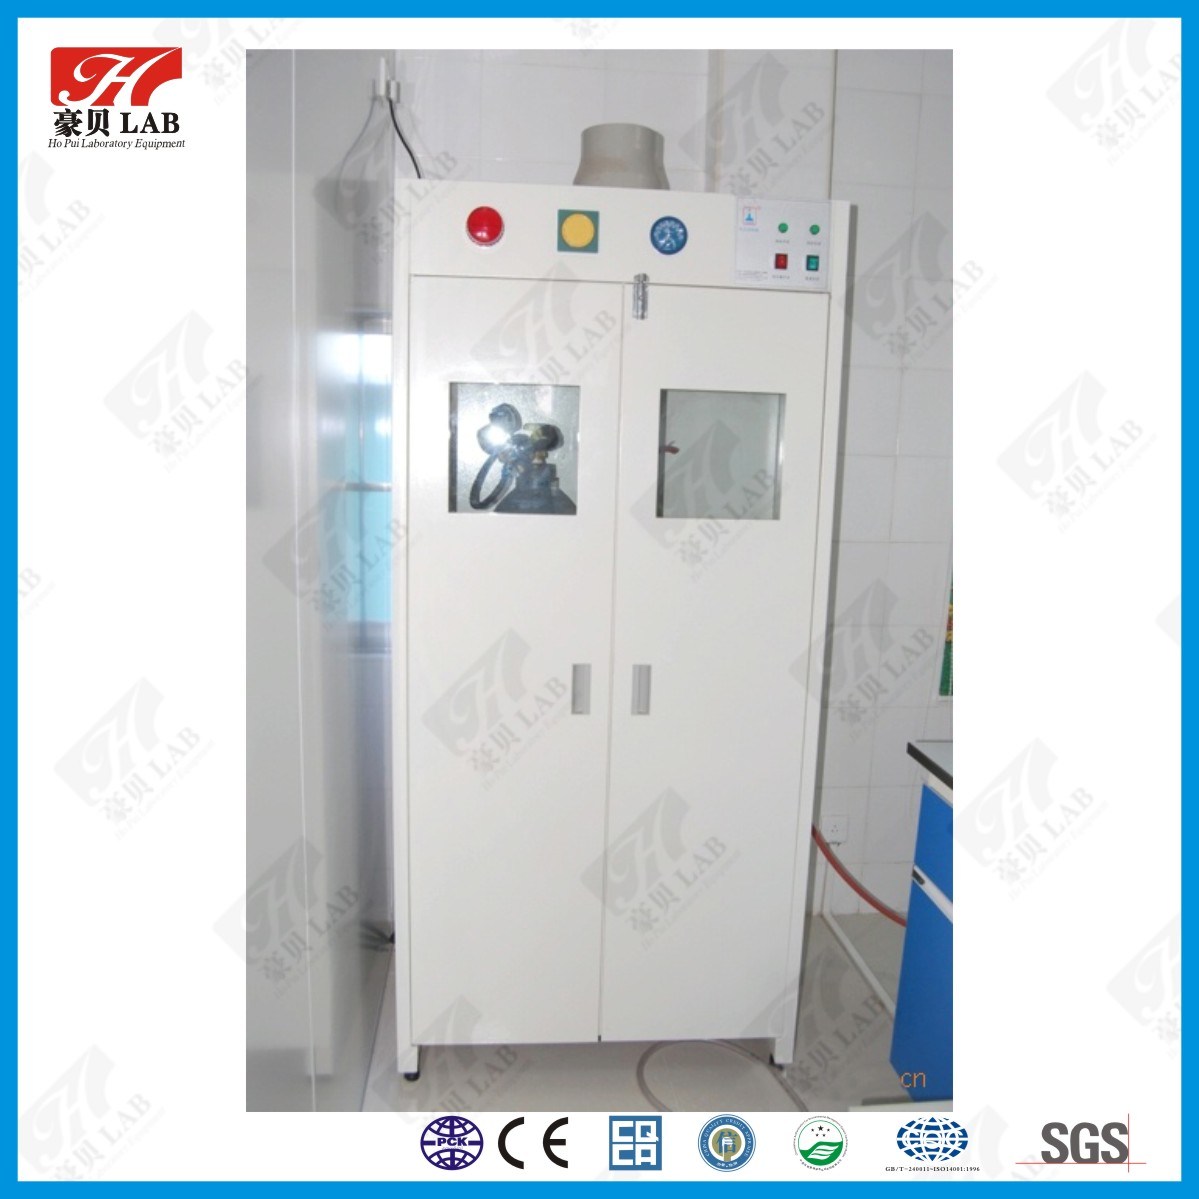 Gas Cabinet with Safety Device